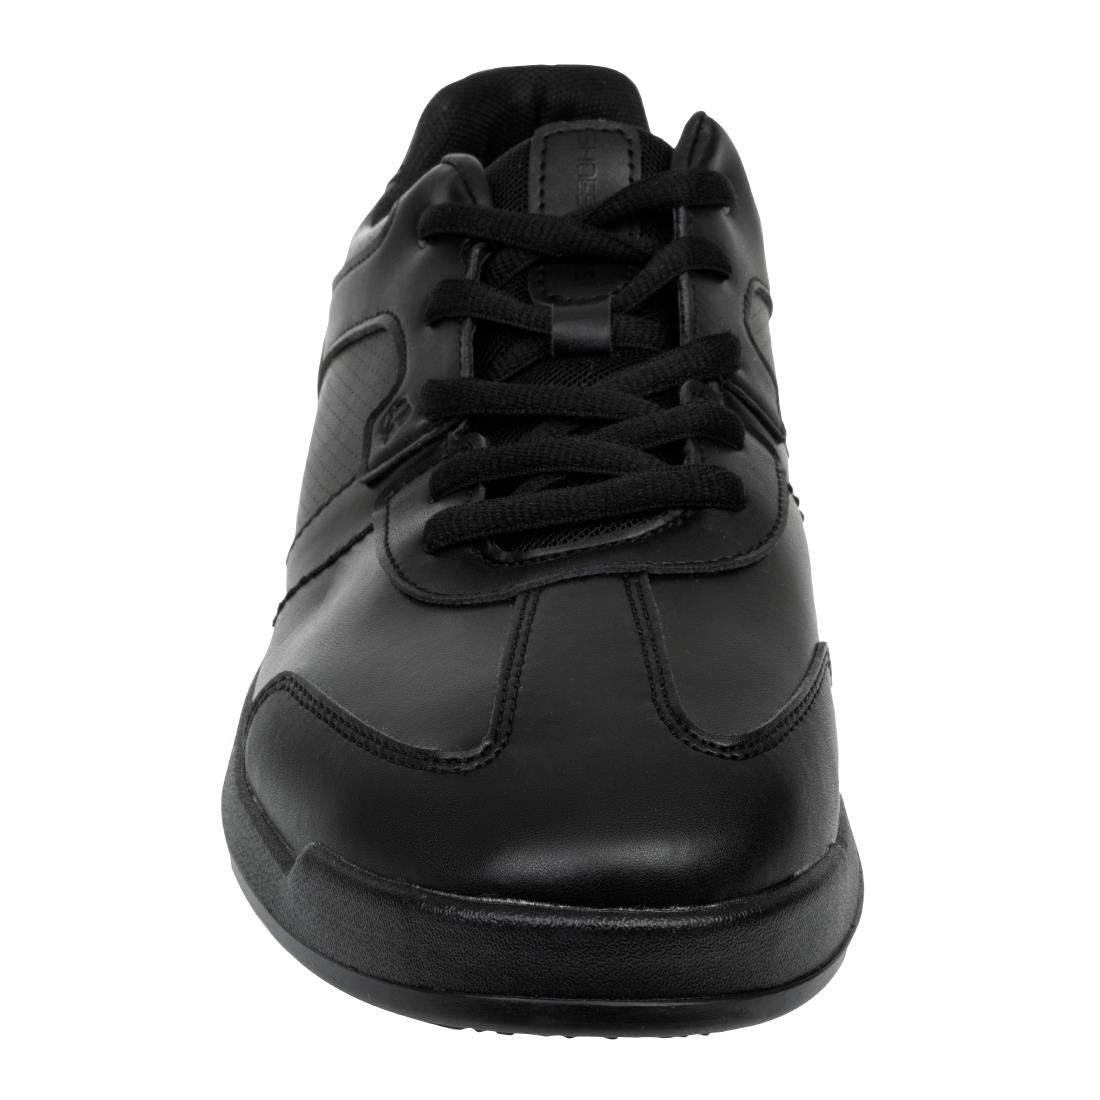 BB585-45 Shoes for Crews Freestyle Trainers Black Size 45